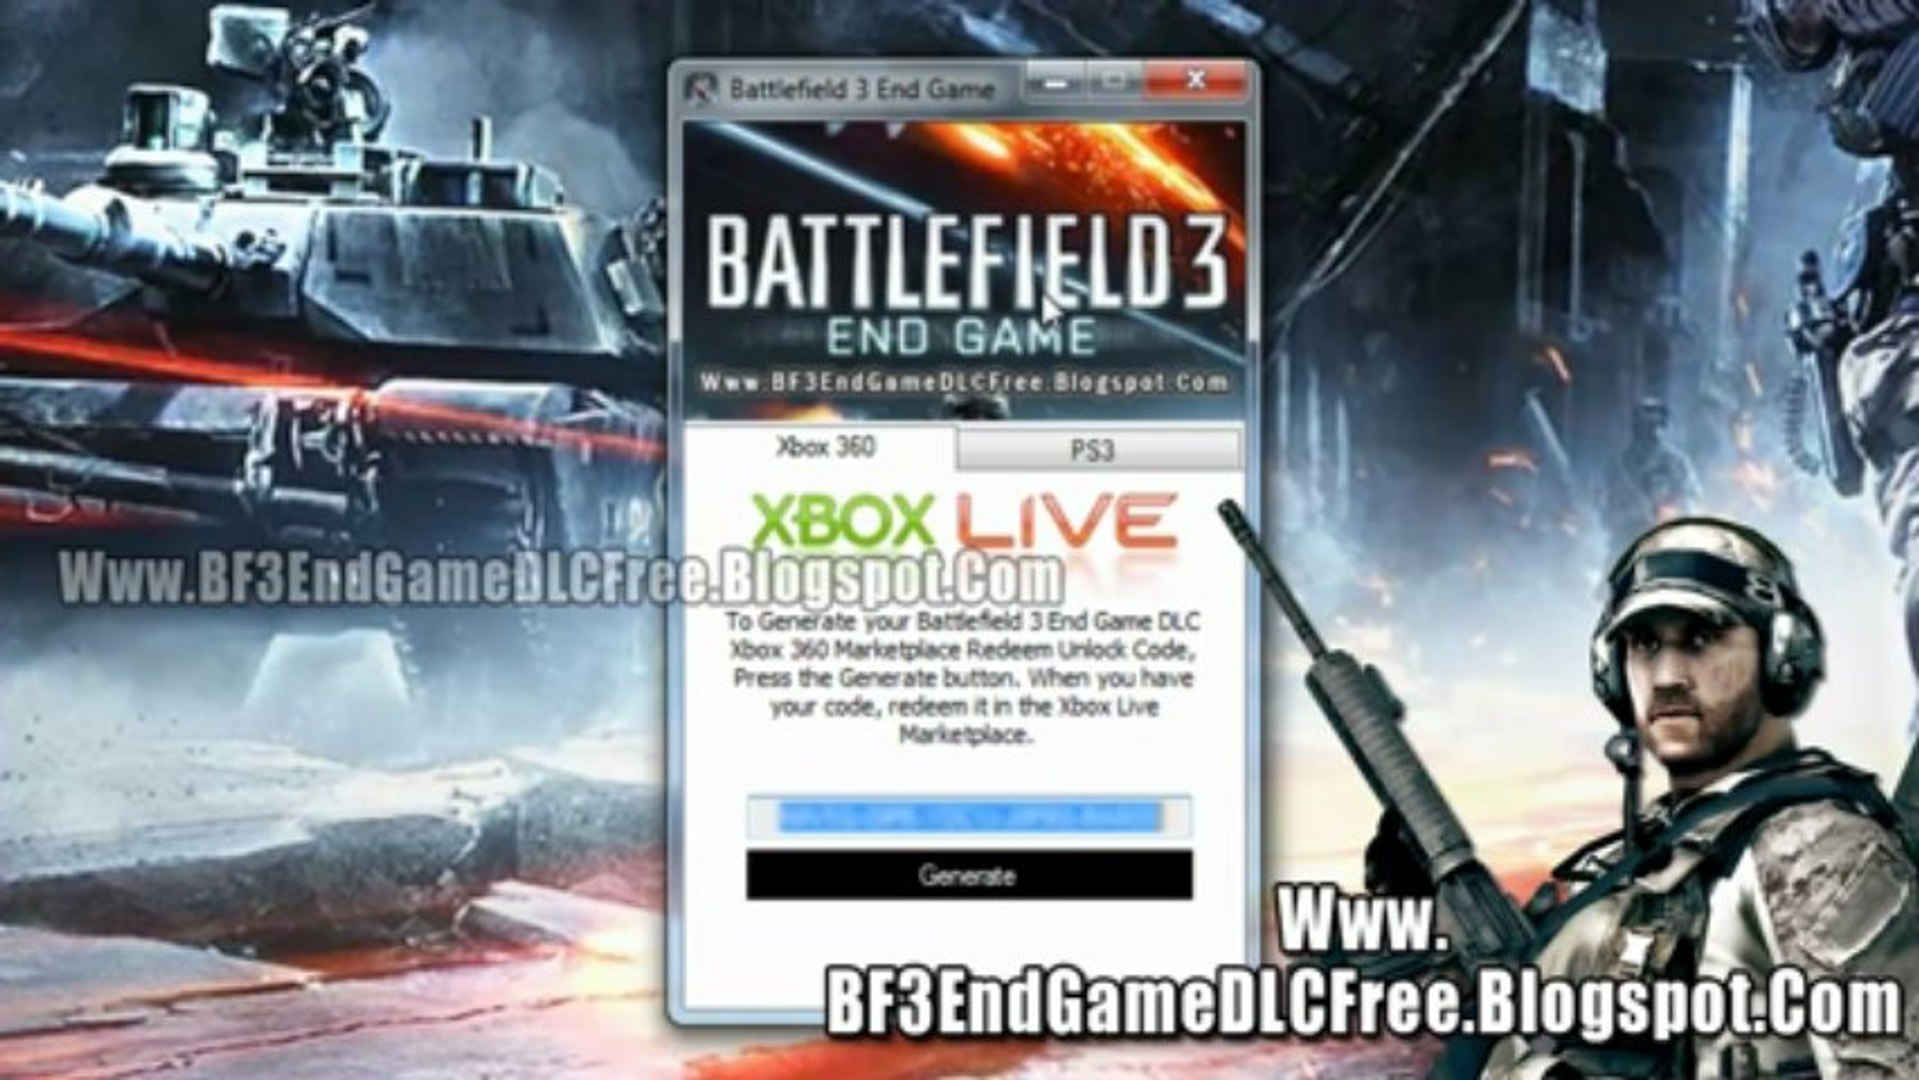 Get Free Battlefield 3 End Game DLC on Xbox 360 And PS3 - video Dailymotion